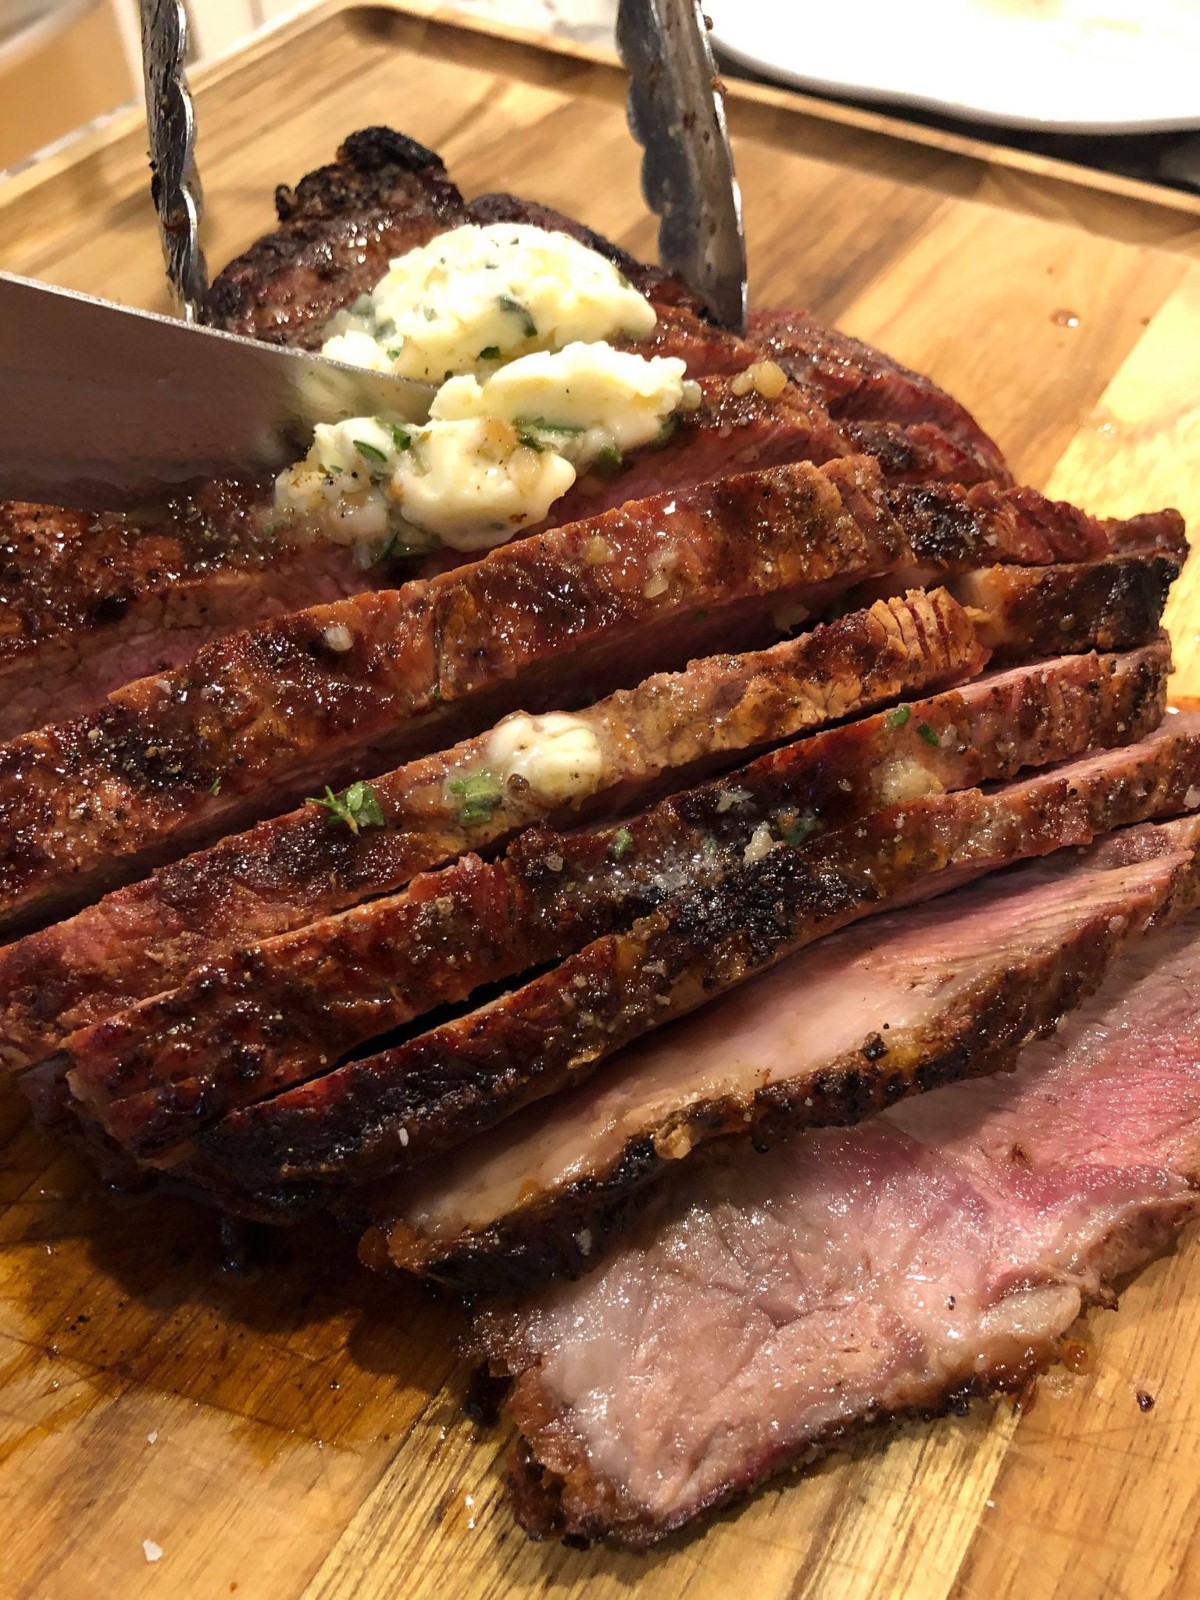 Grilled tomahawk steak being sliced on a wooden cutting board.